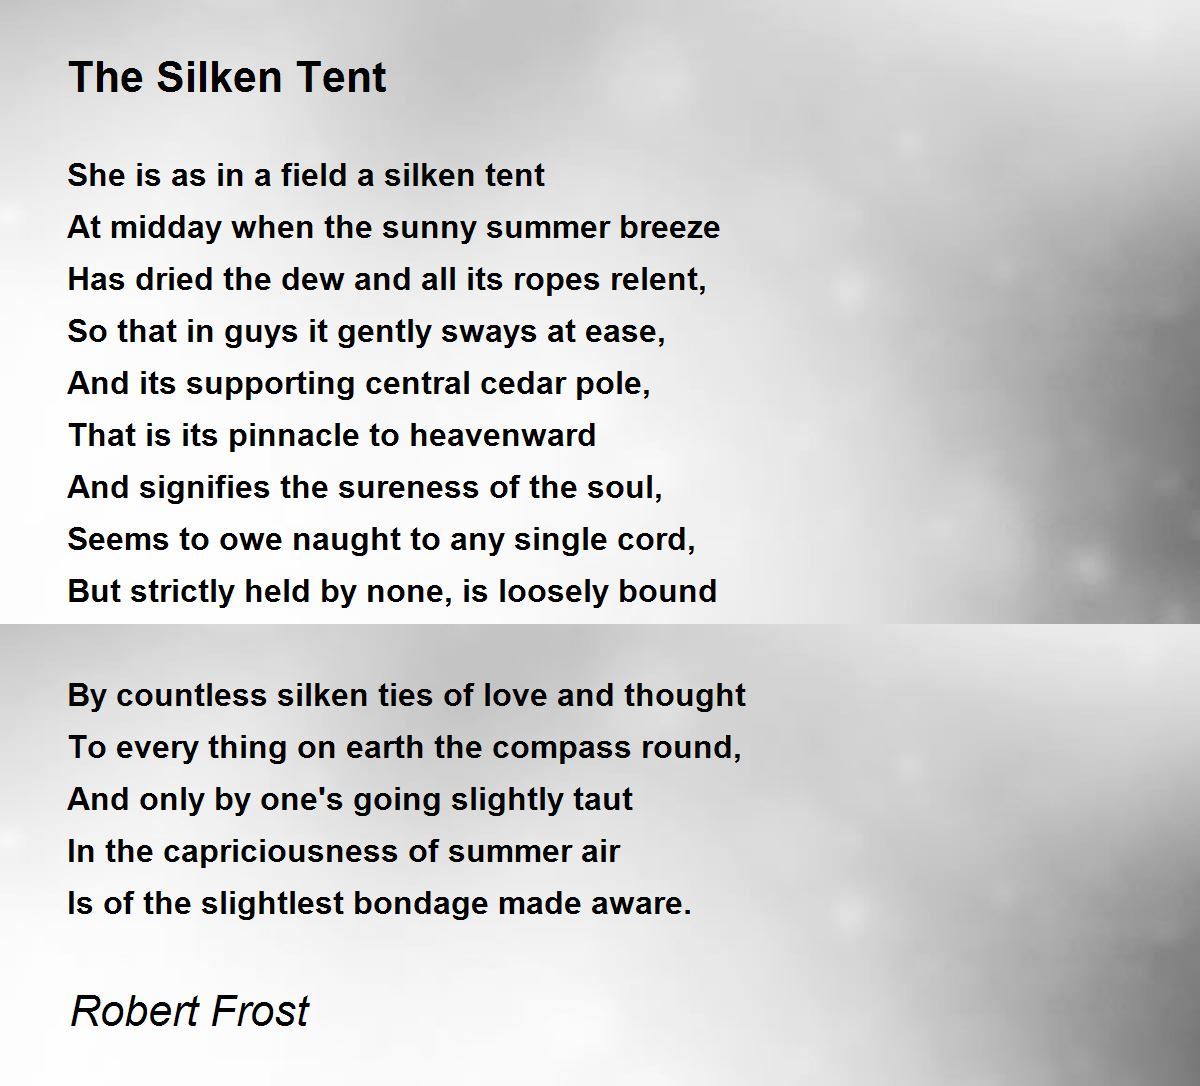 Free essay on robert frost poems